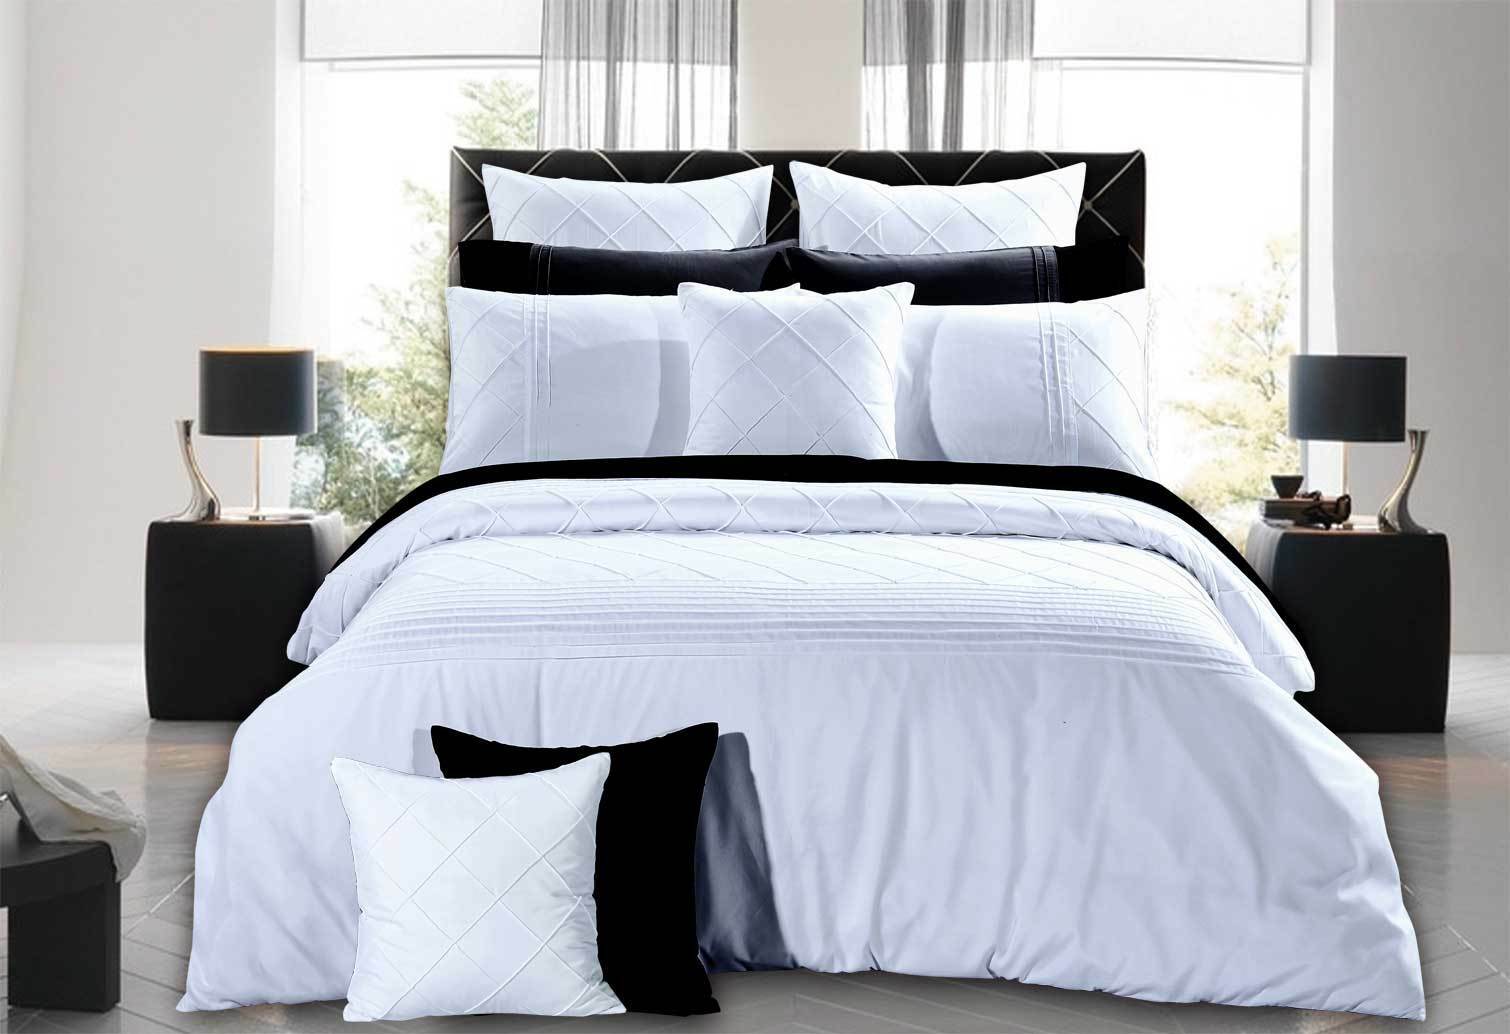 Lamere White Diamond Pintucking Quilt Cover Set By Luxton